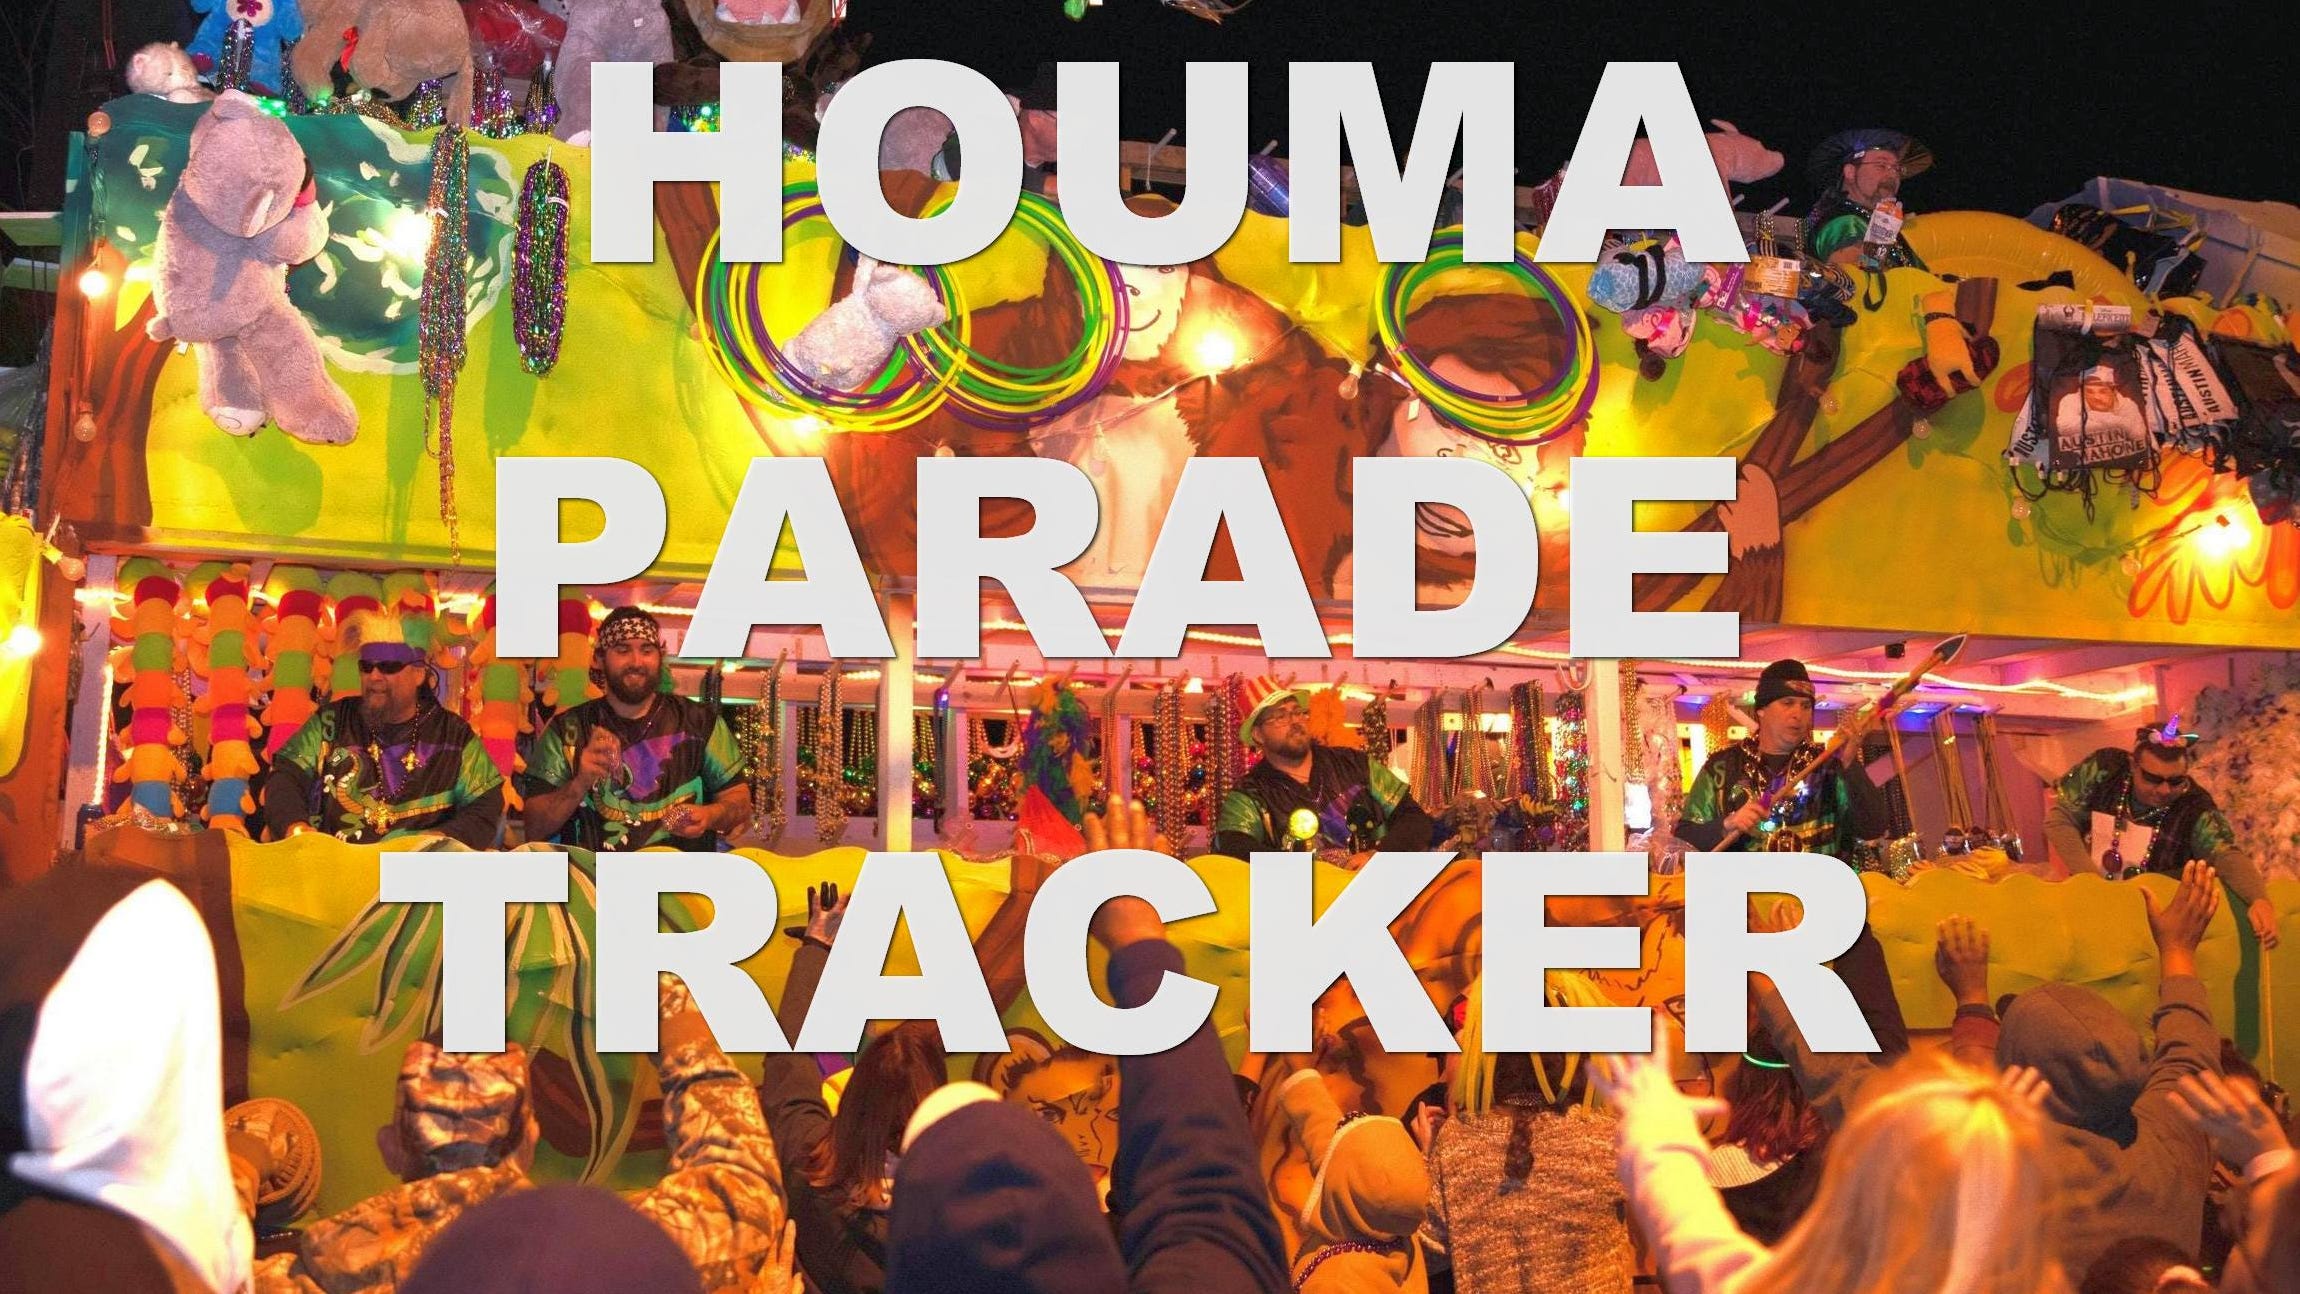 Use our Houma Parade Tracker to follow the floats through town